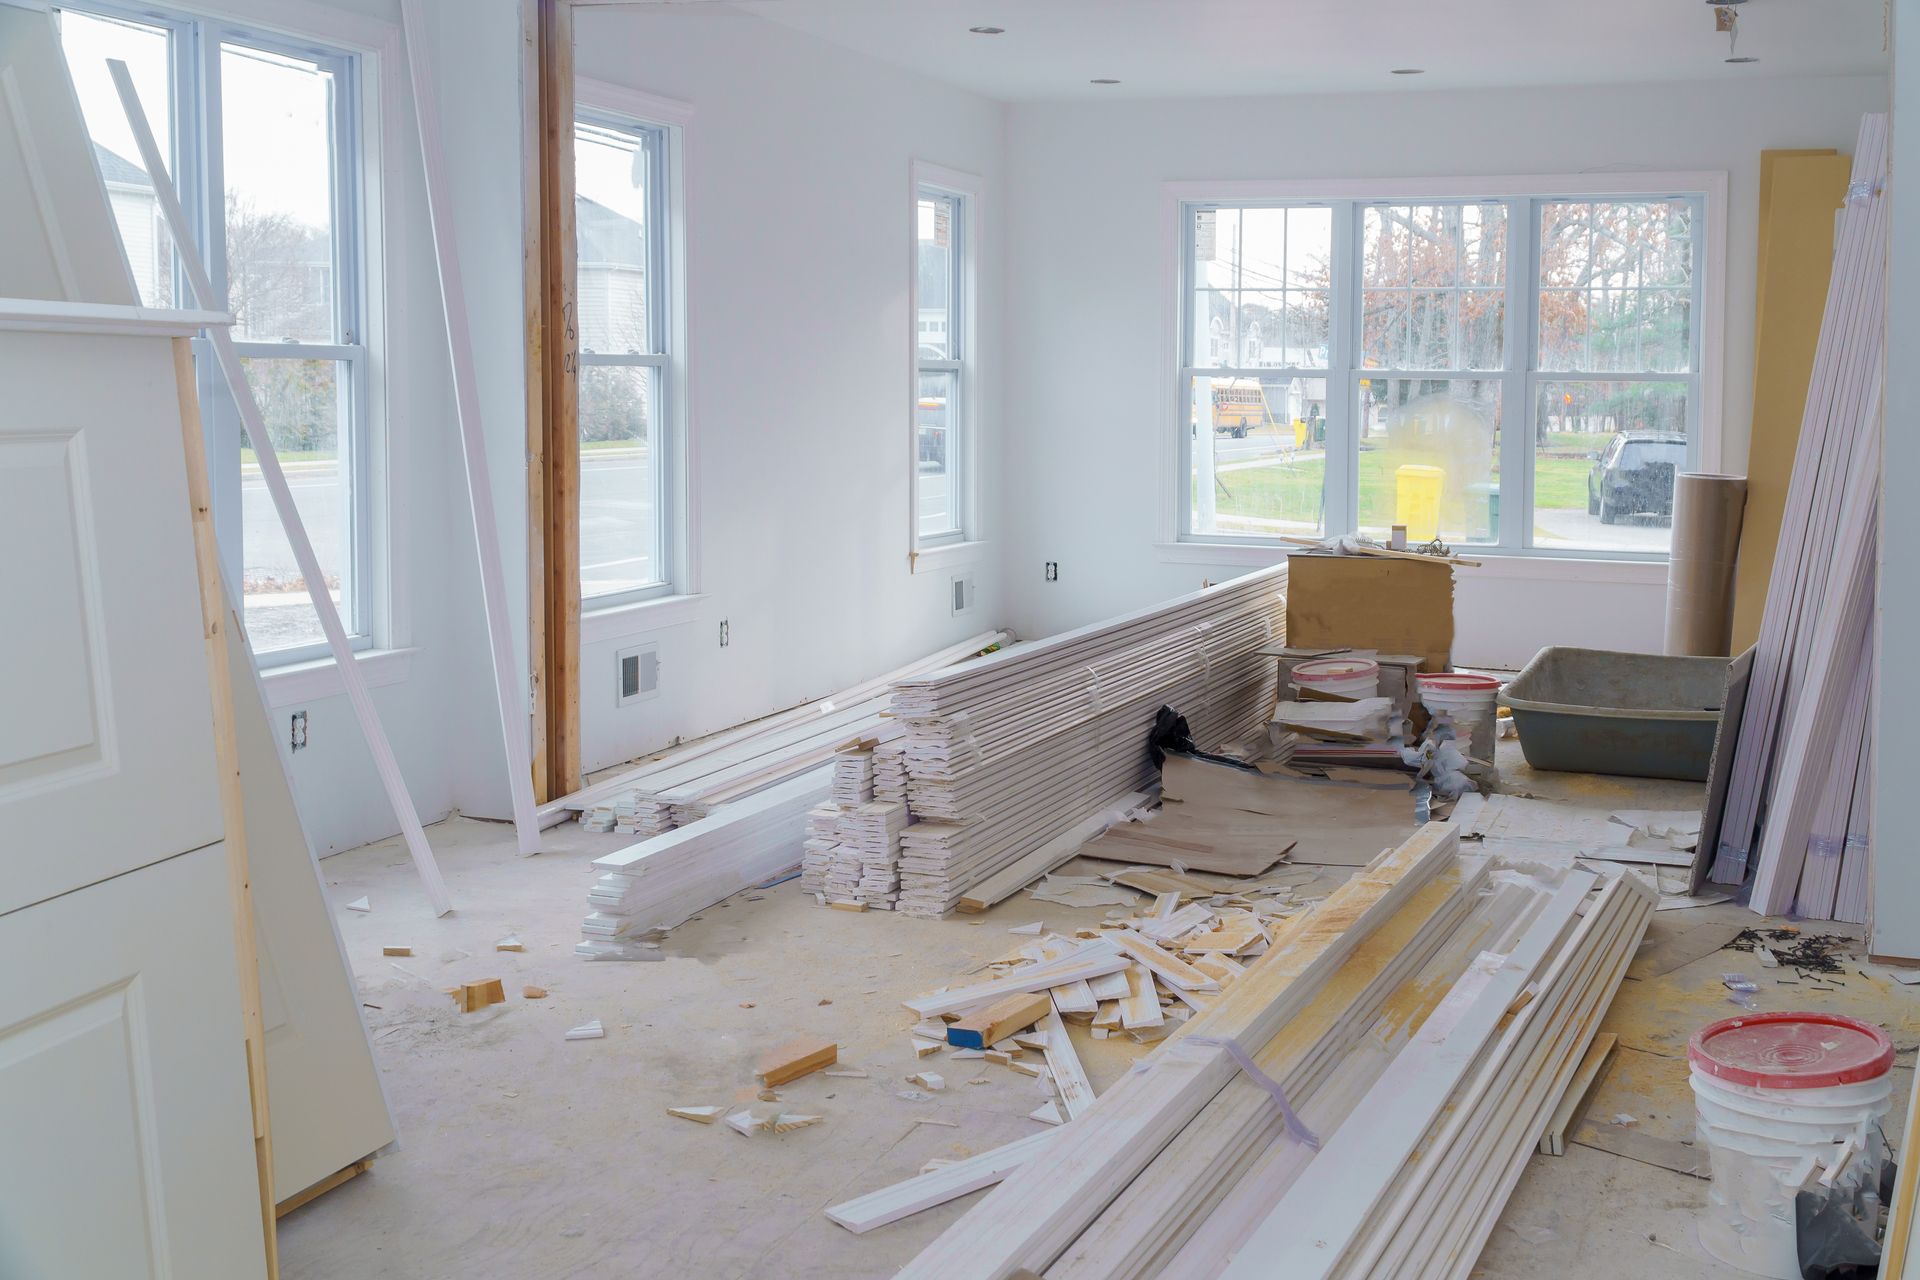 a living room in a house under construction with a lot of wood laying on the floor .